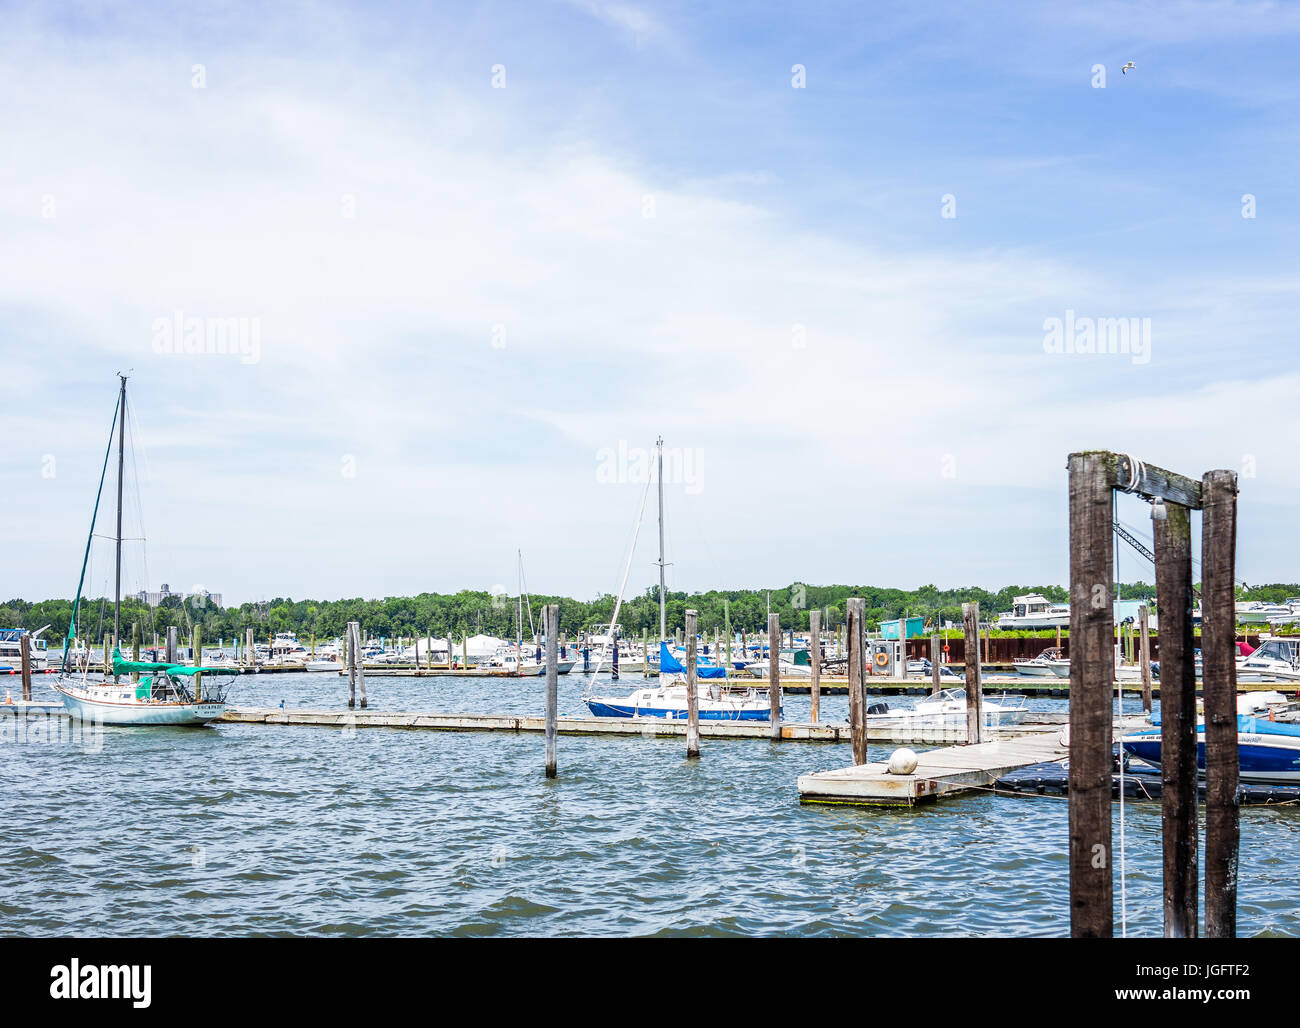 Bronx, USA - June 11, 2017: City Island harbor with boats and pier Stock Photo